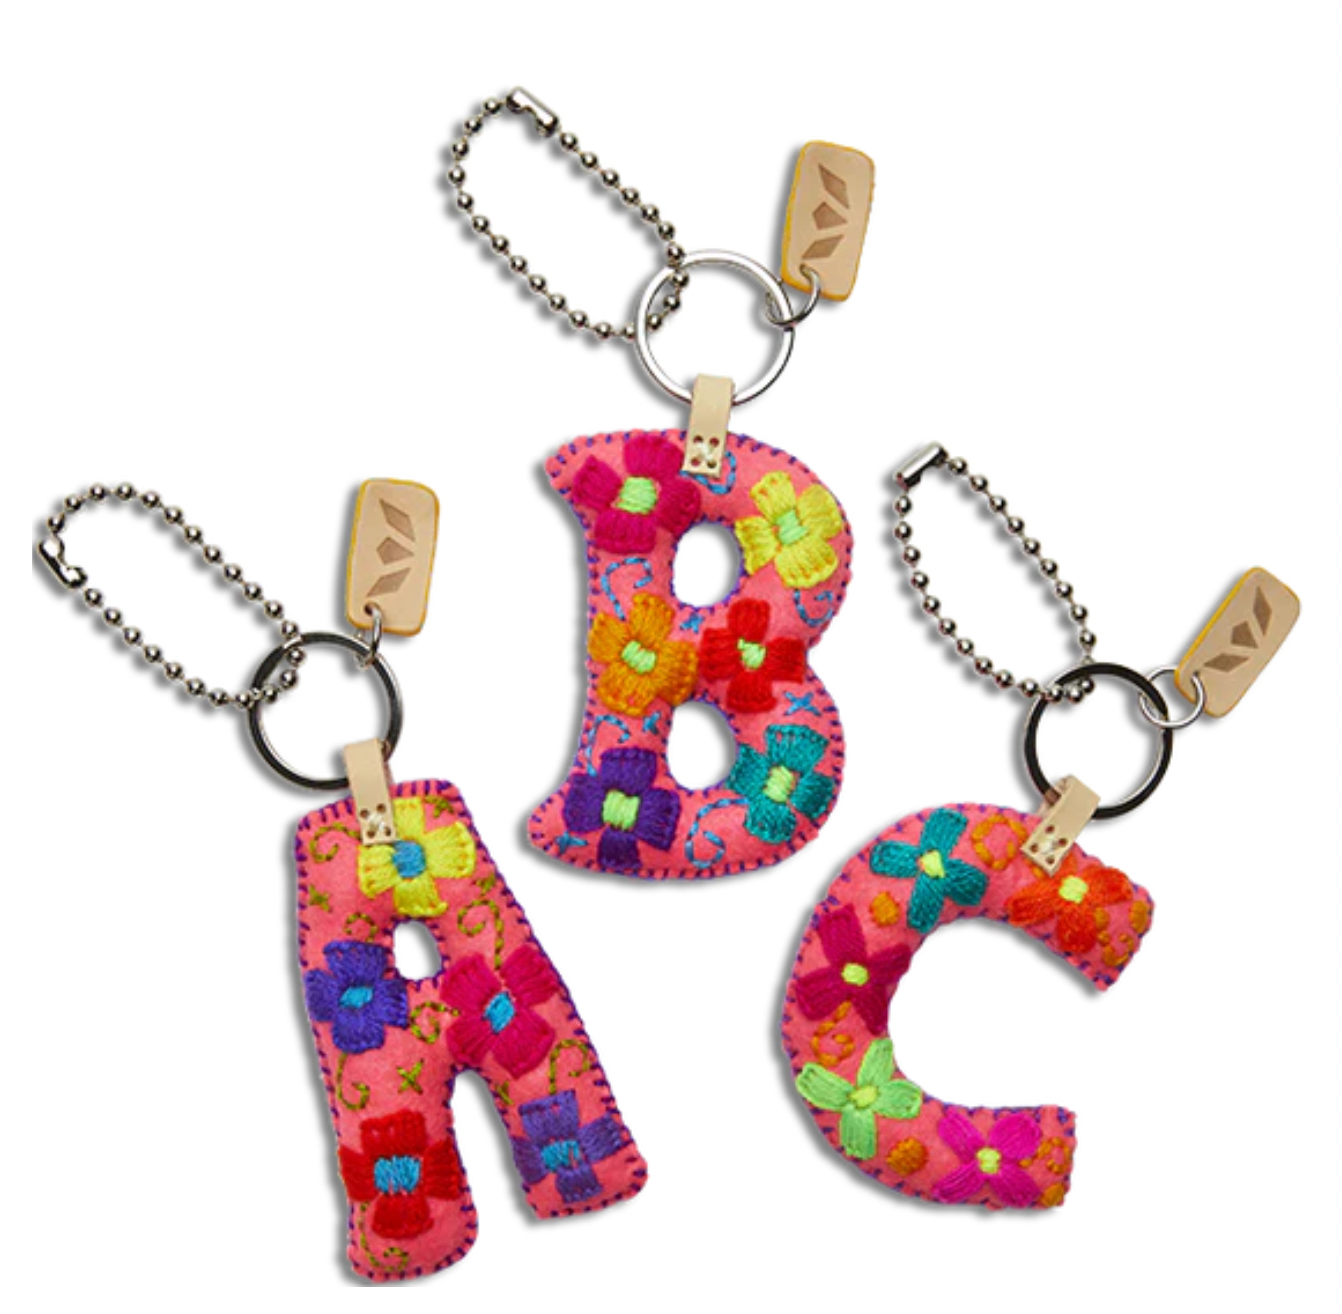 Consuela Felt Letter Charms in Pink